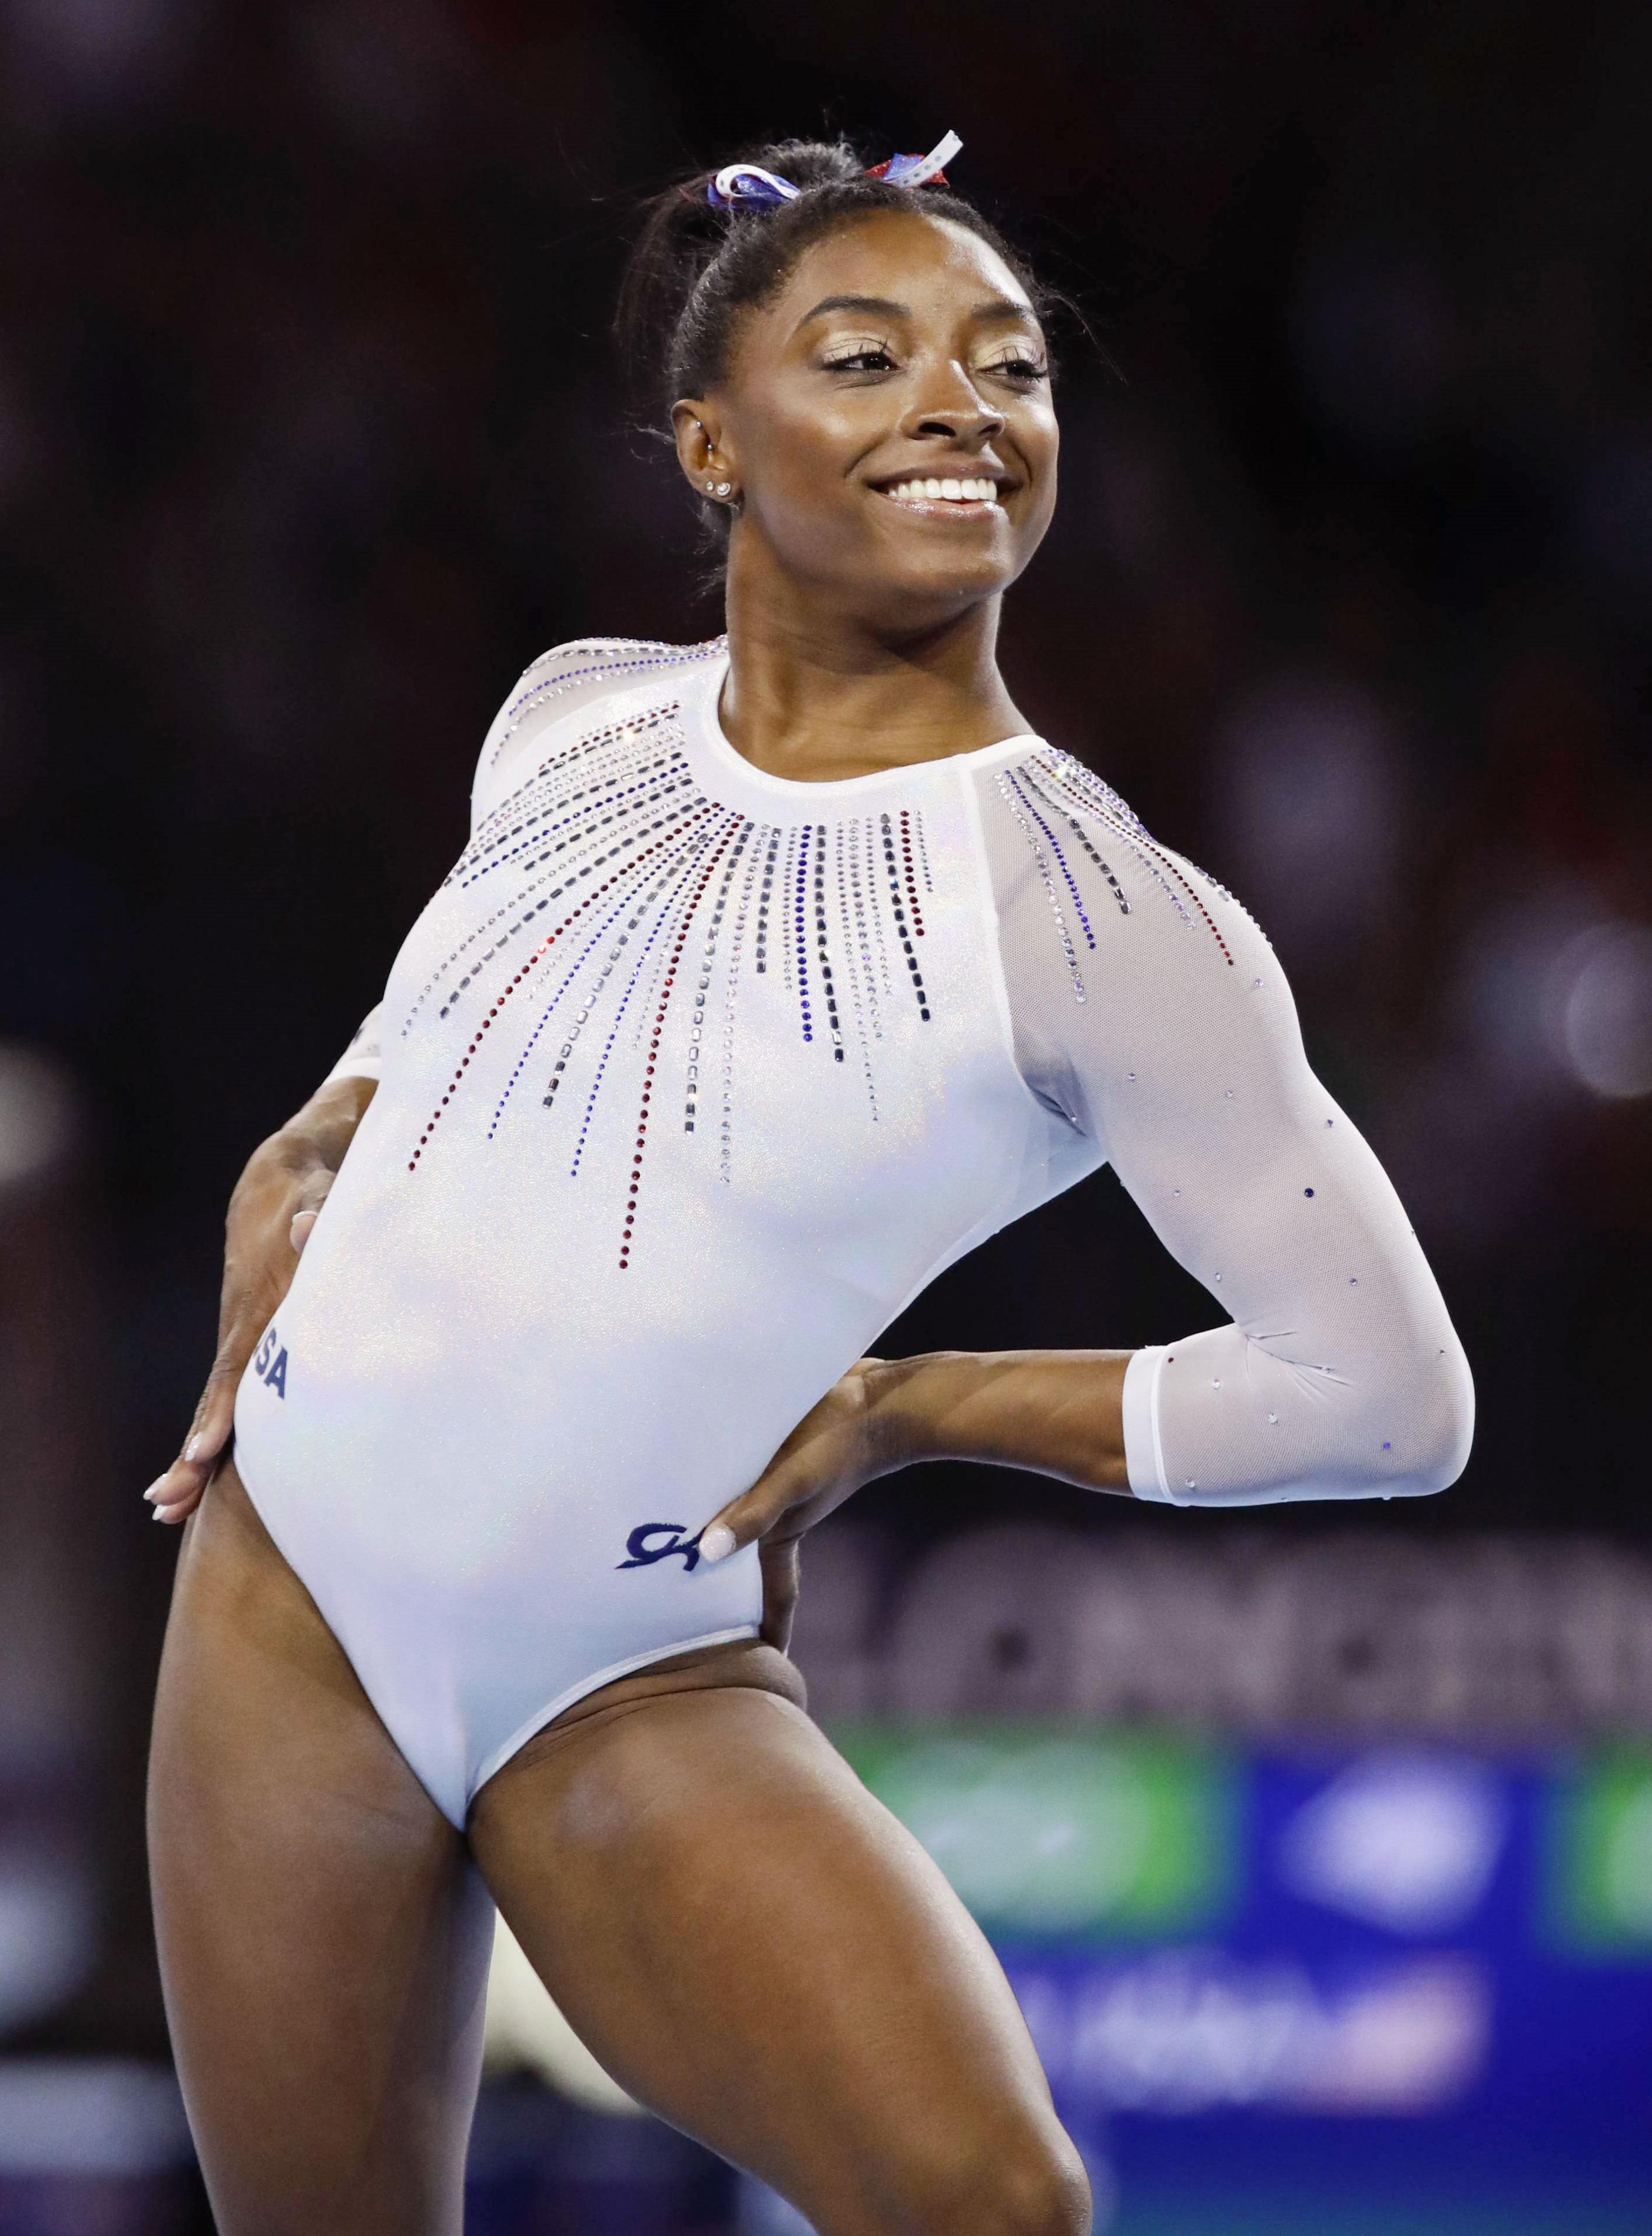 Simone Biles of the United States performing at the World Gymnastics Championships in Stuttgart, Germany. | Source: Getty Images